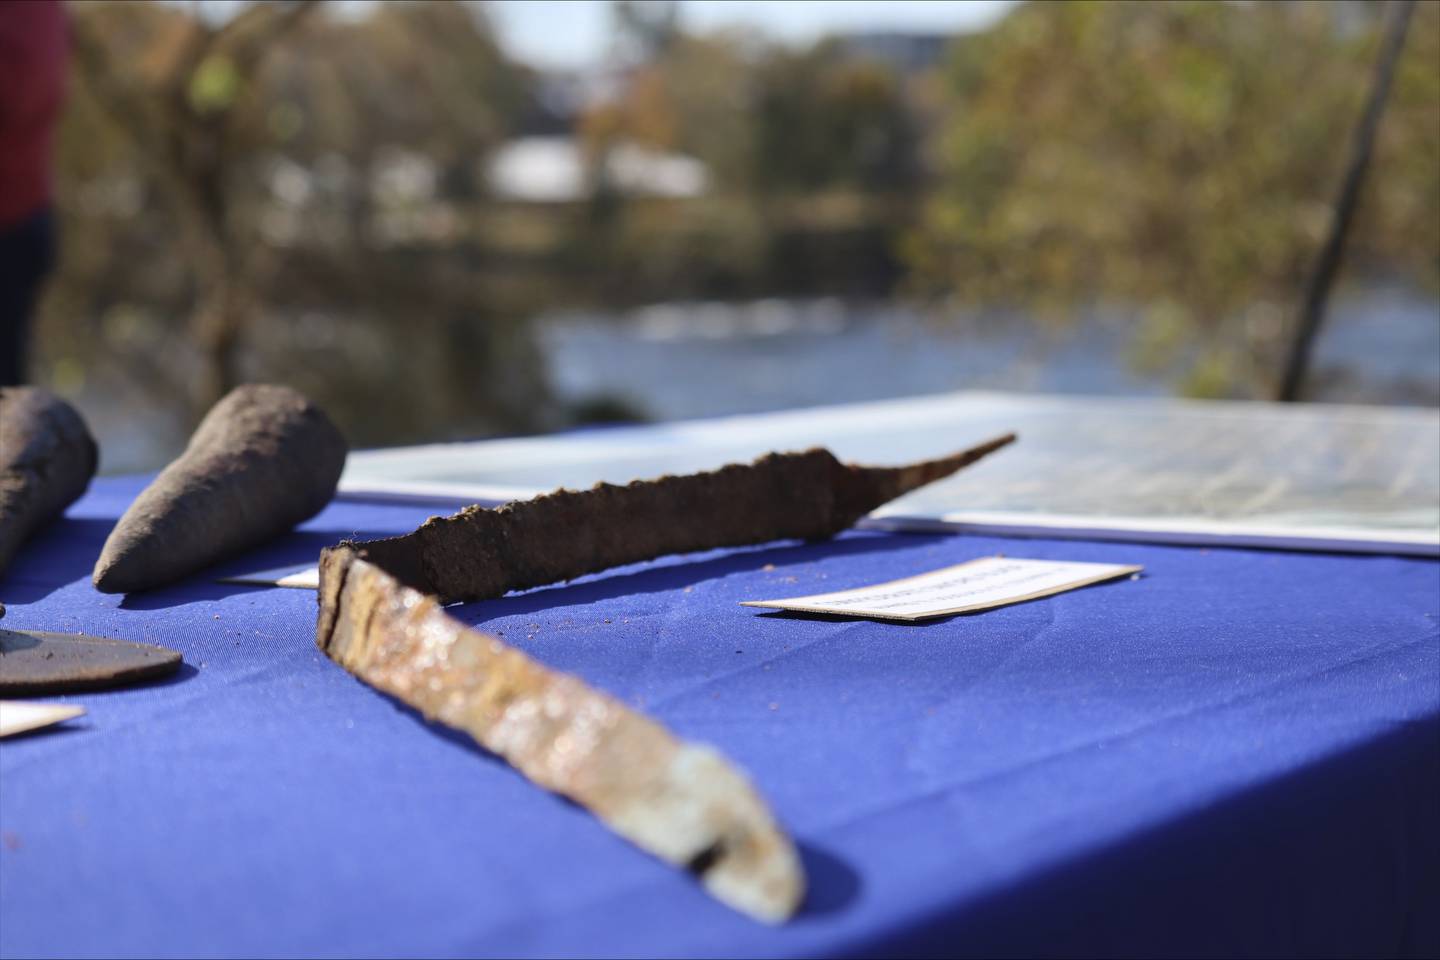 A Confederate sword blade is displayed at a press conference celebrating the early completion of the Congaree River cleanup on Monday, Nov. 13, 2023 in Columbia, S.C.